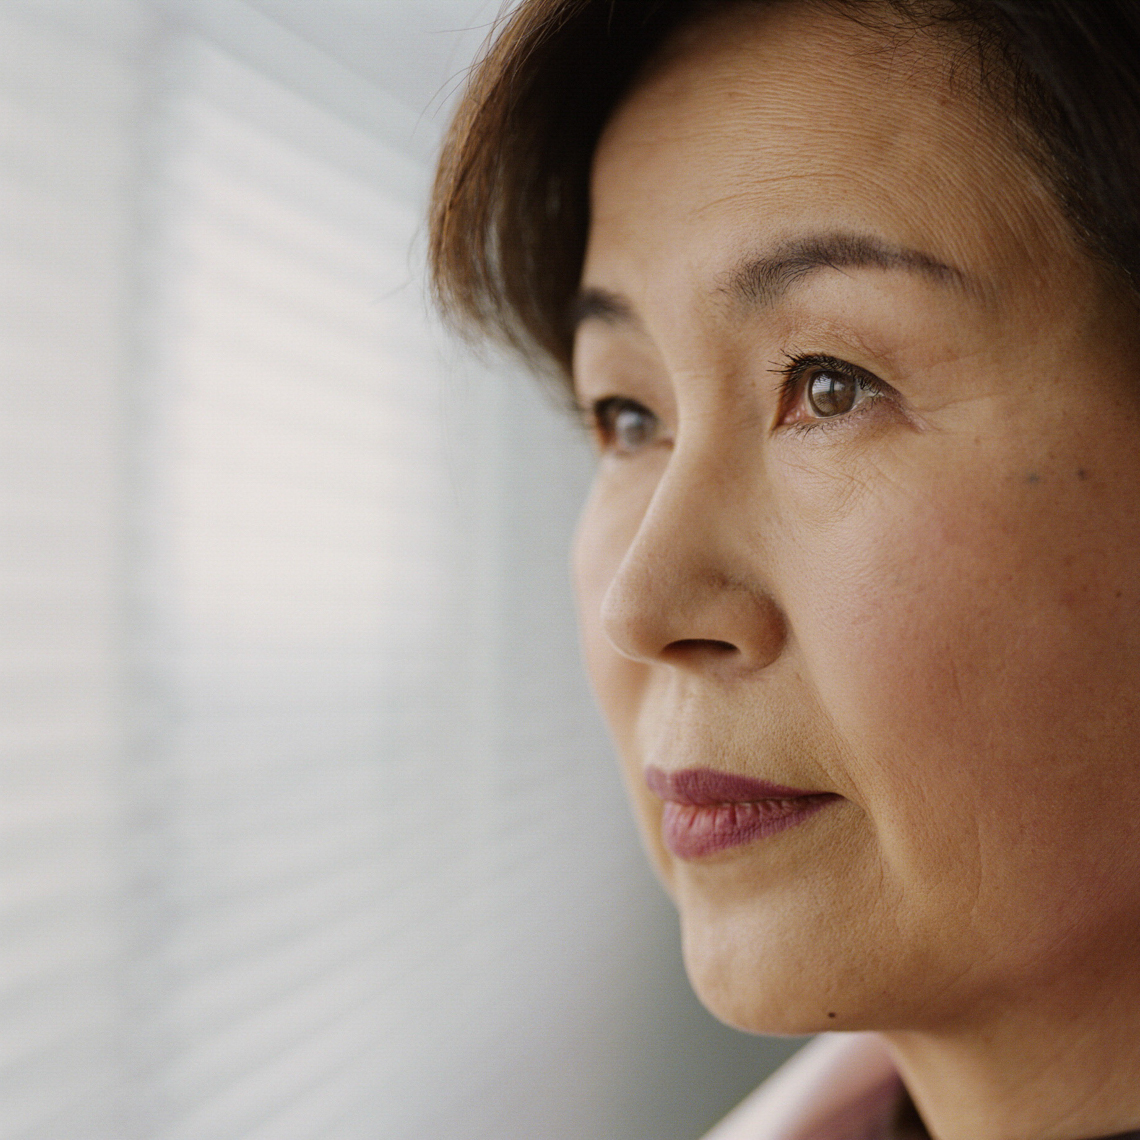 Middle-aged woman of Asian heritage stares thoughtfully out window